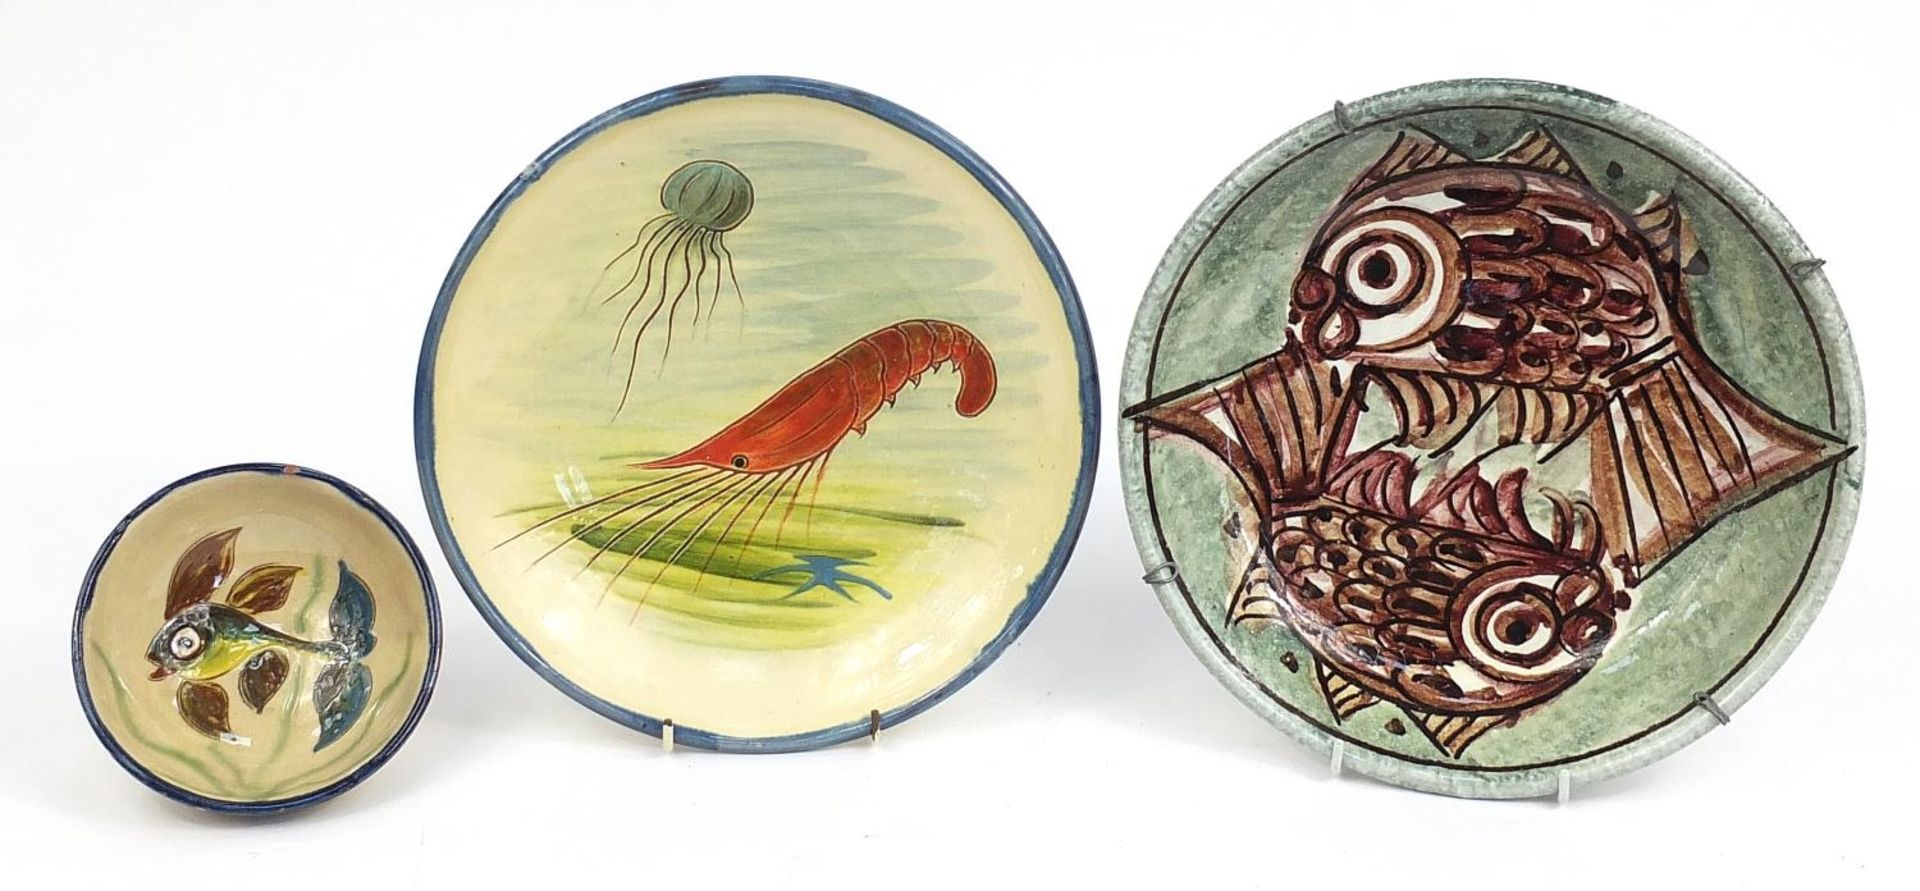 Hand painted lobster design pottery plate, fish design plate and small fish design bowl, the largest